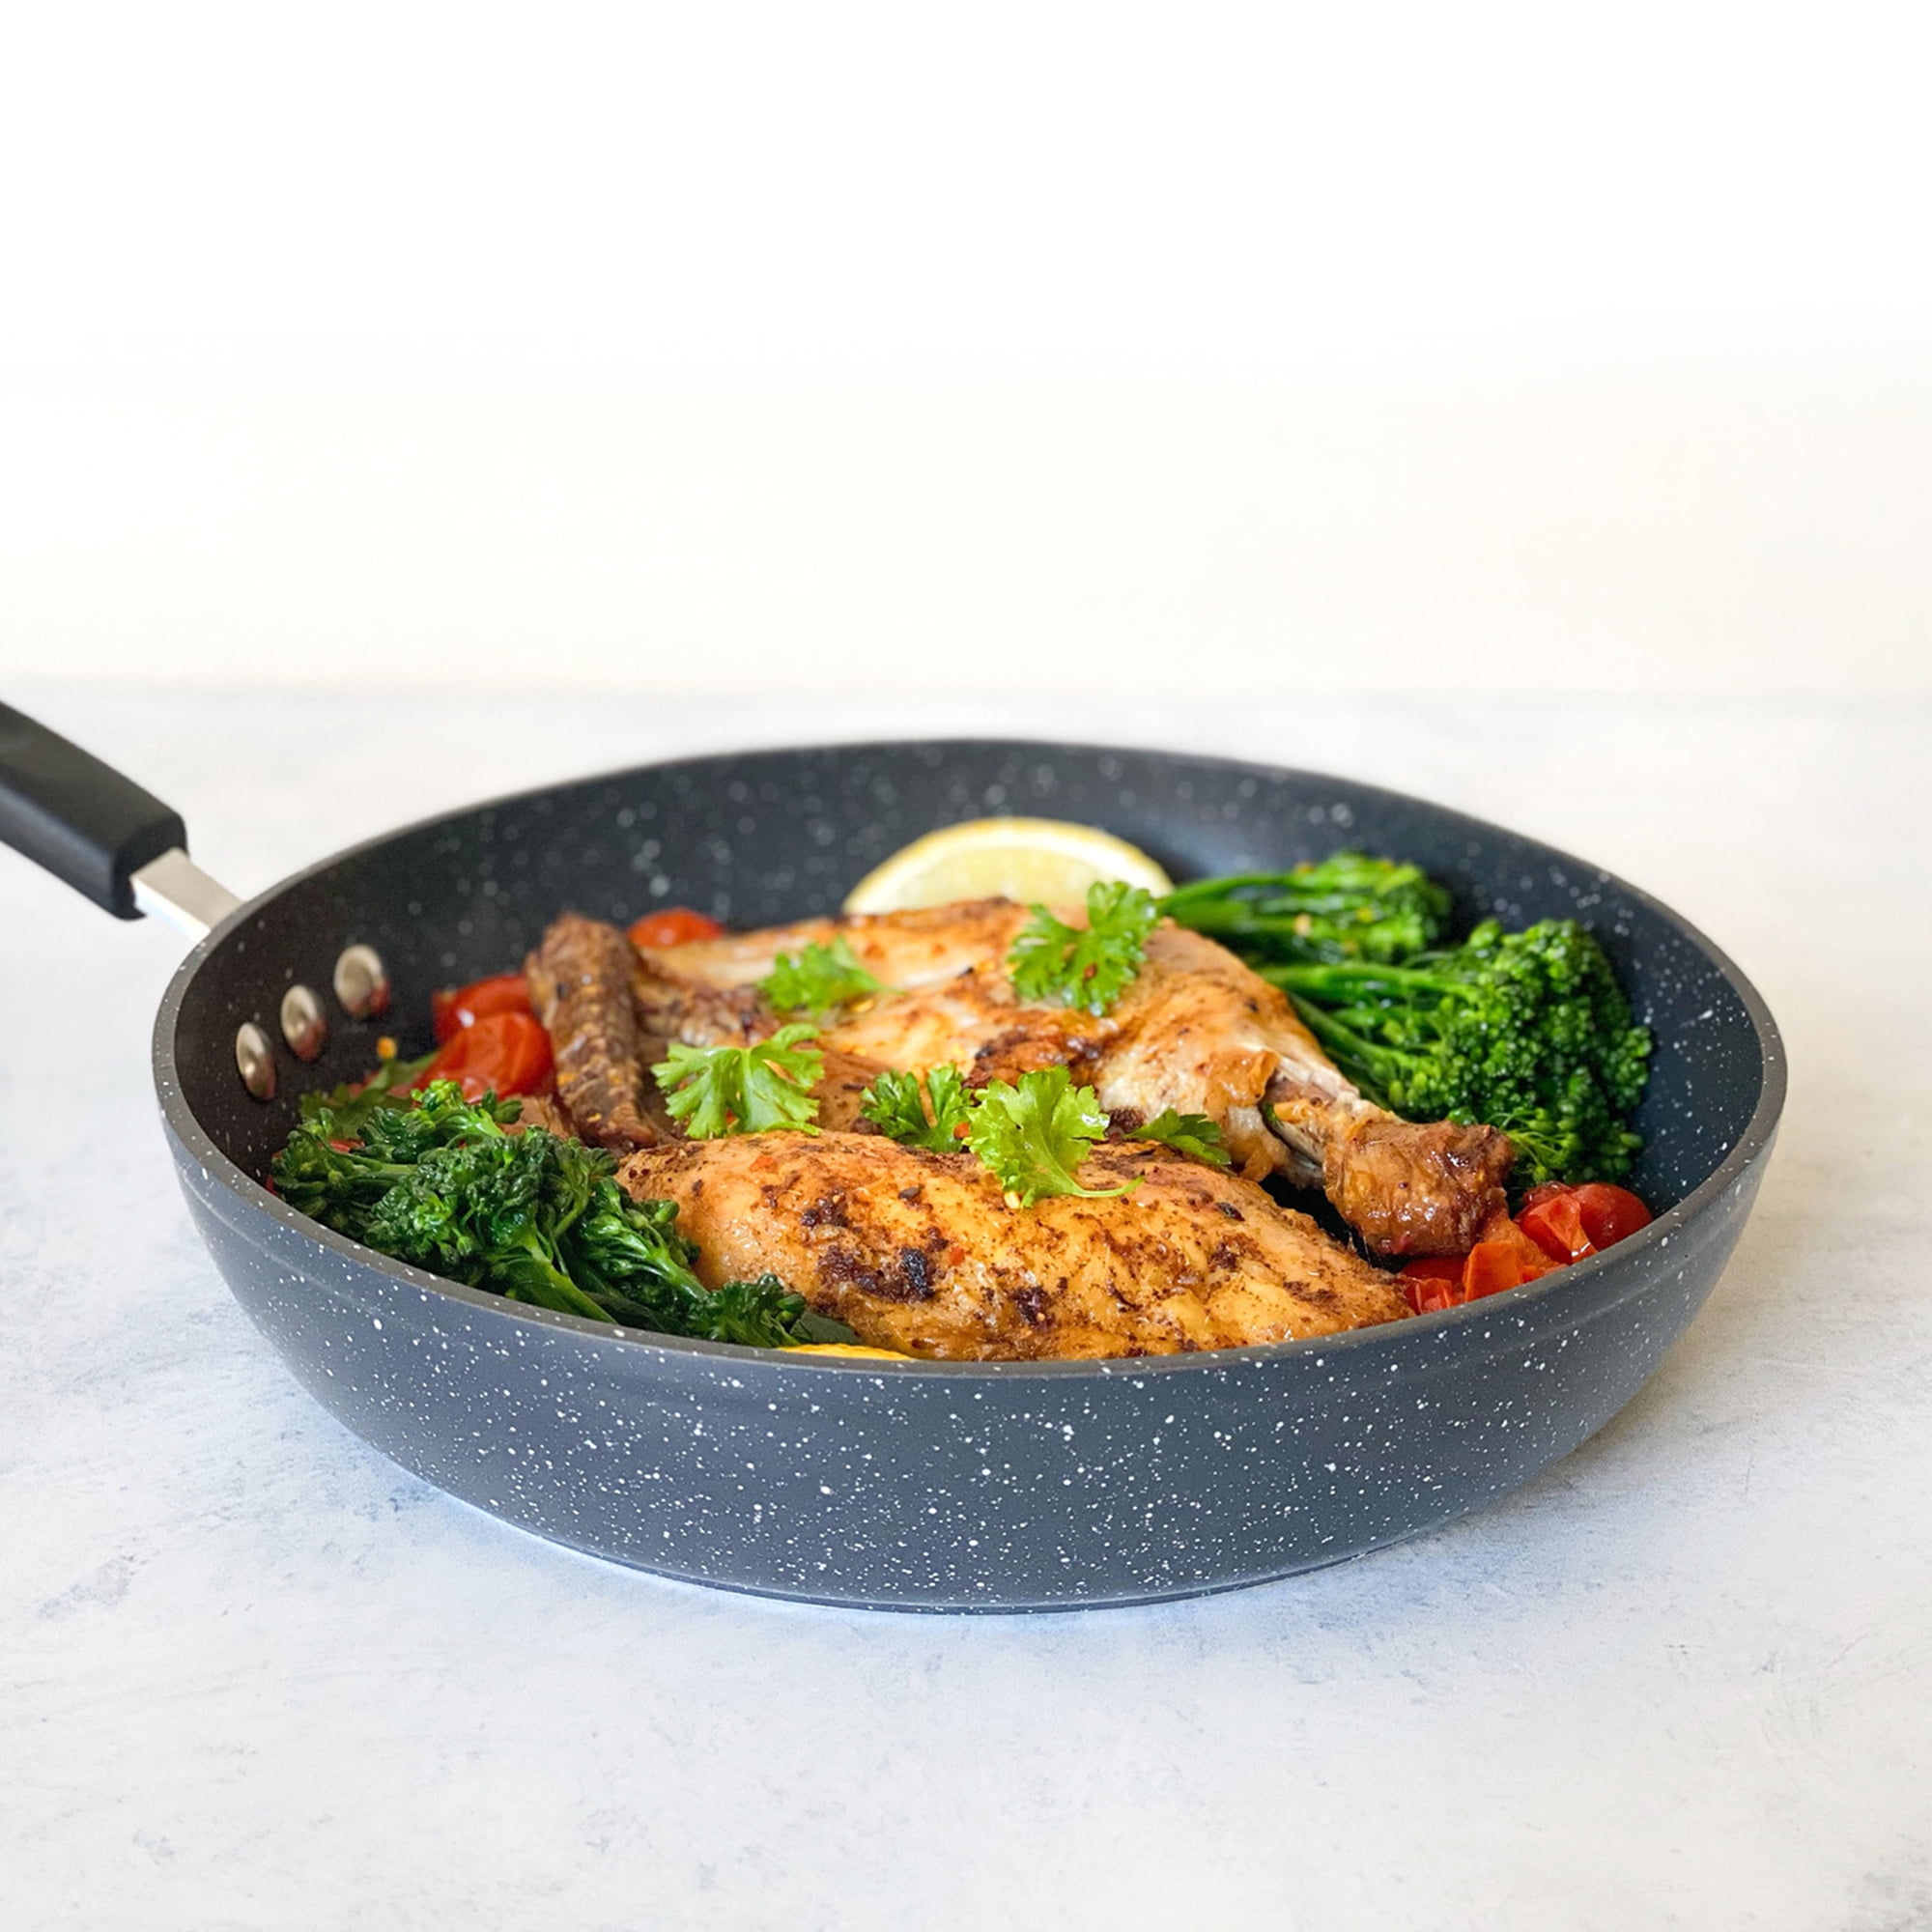 8 Stone Earth Fry Pan by Ozeri, with a 100% APEO & PFOA-Free Nonstick  Coating from Germany, 1 - Harris Teeter